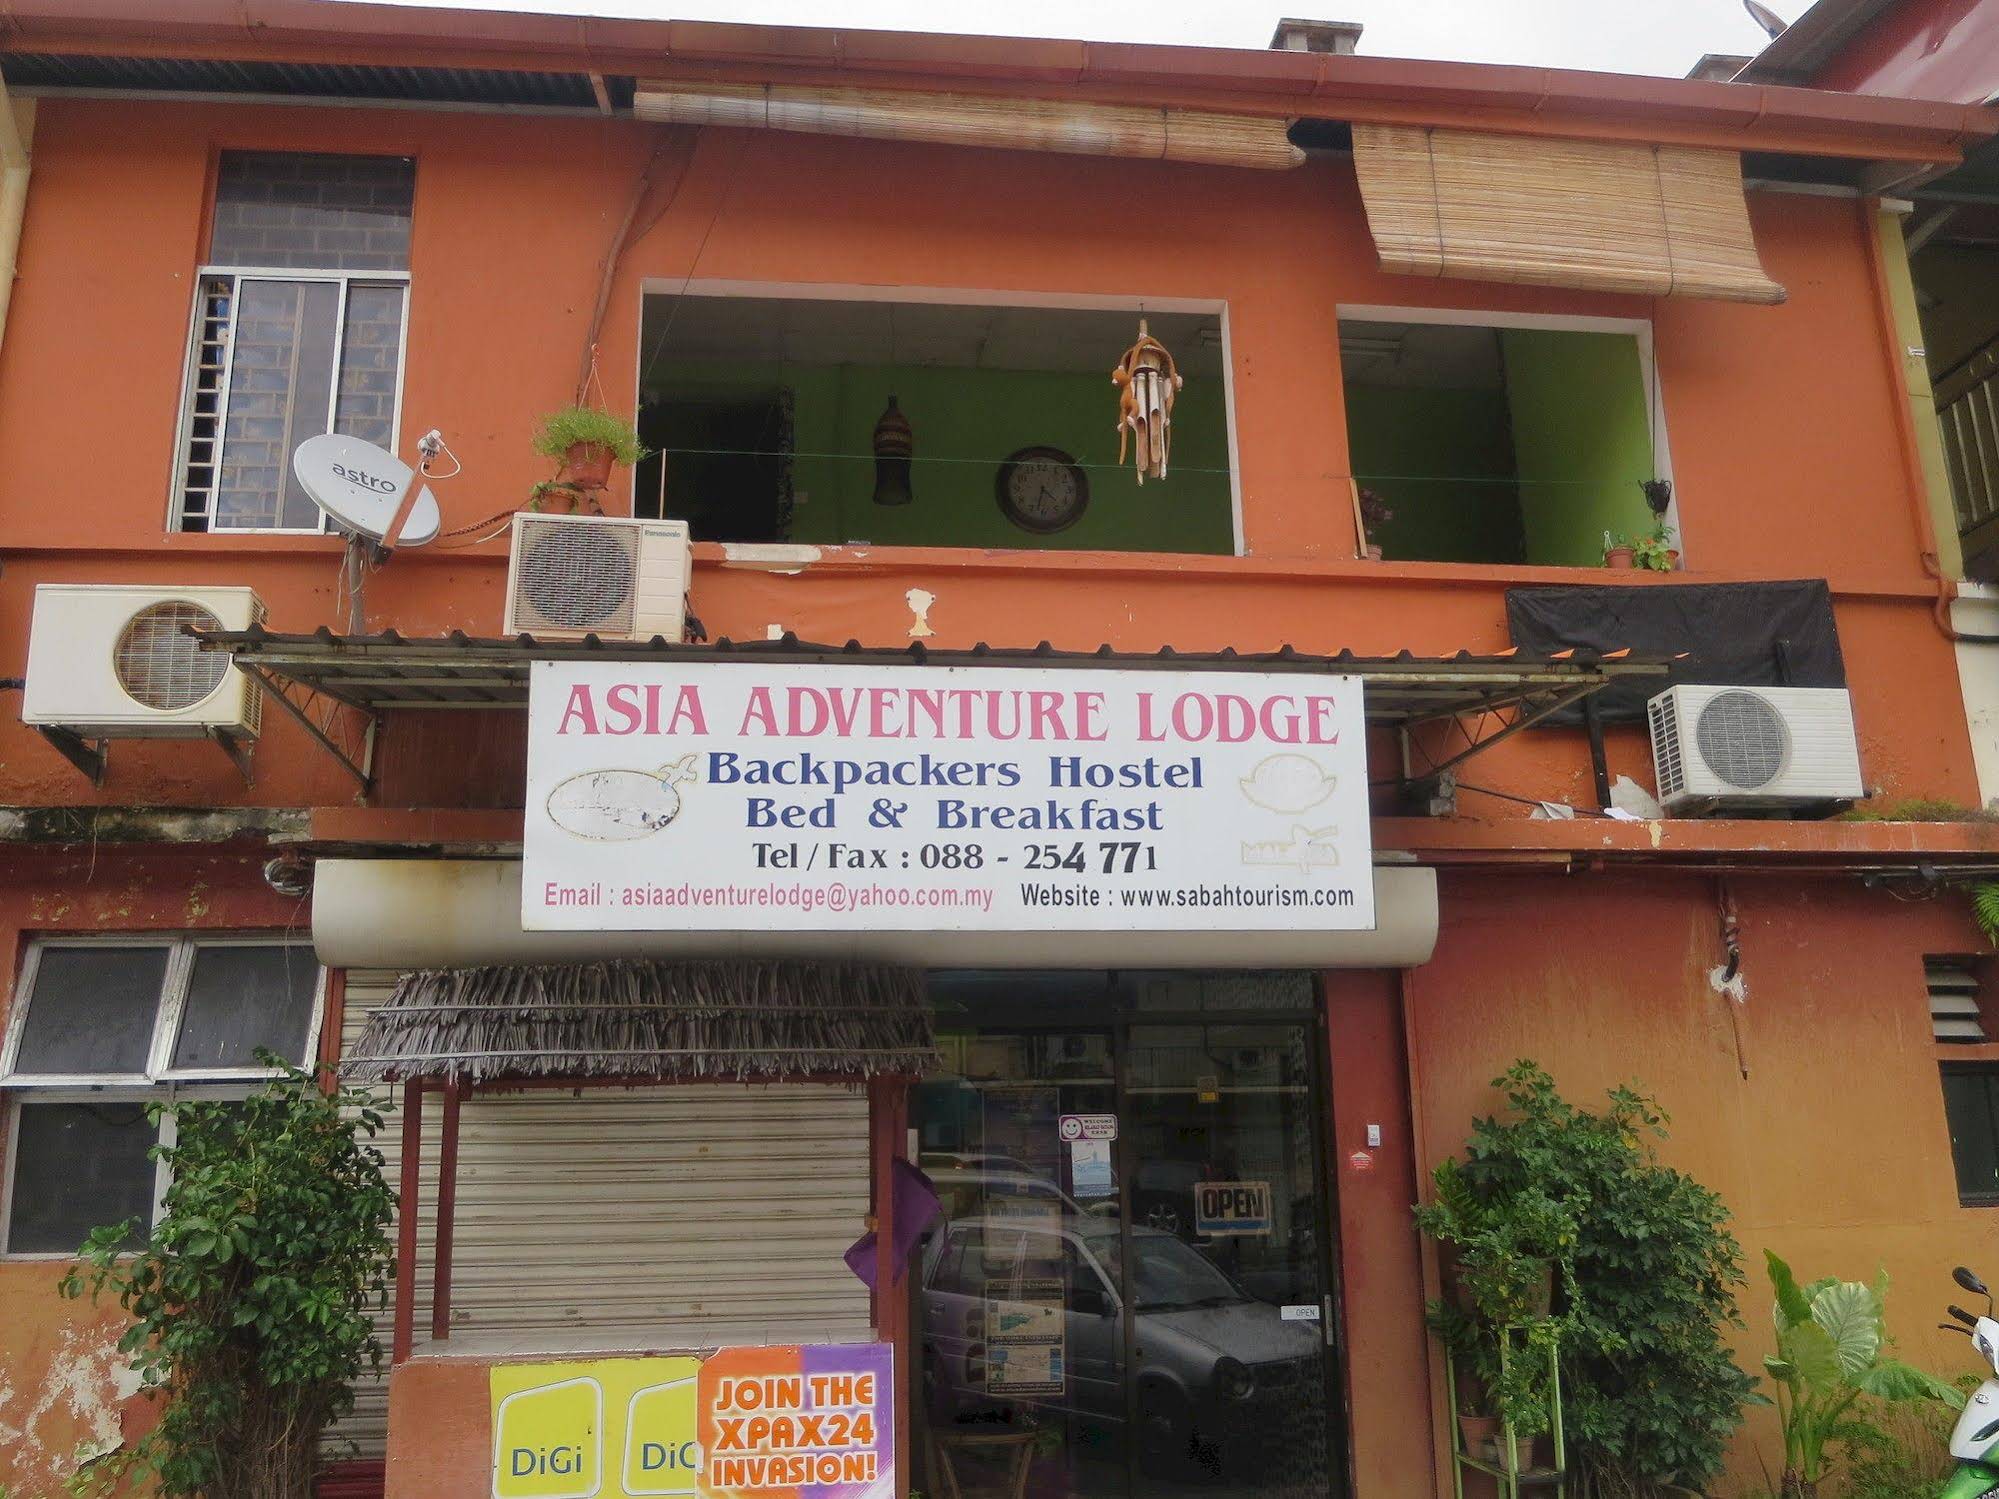 Asia Adventure Lodge Backpackers Hostel